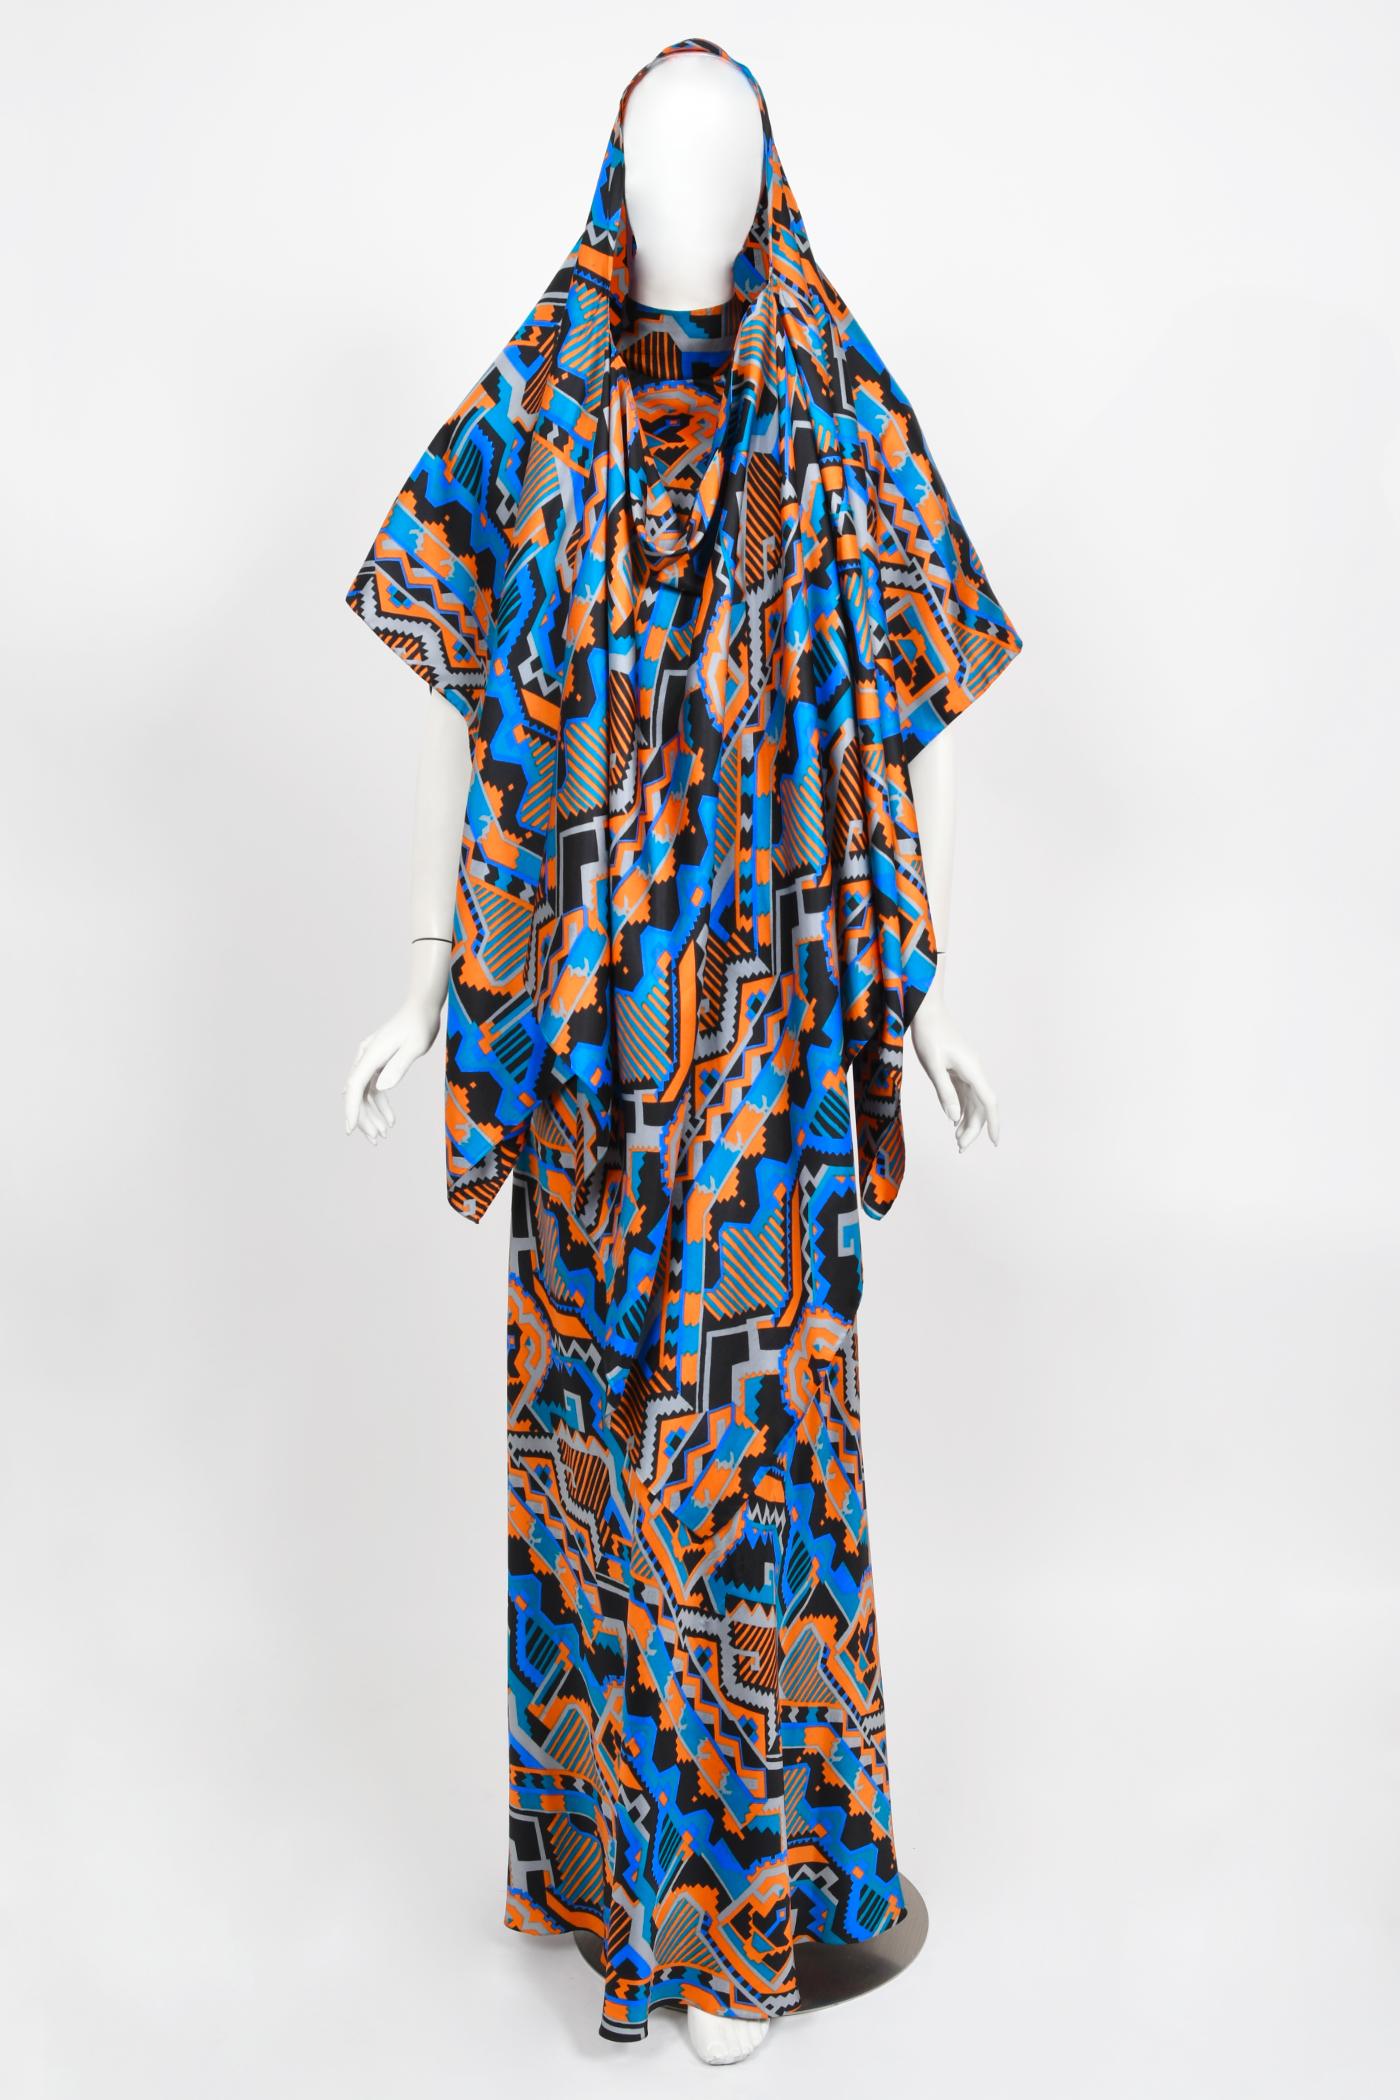 Vintage 1970's Madame Grès Haute Couture Graphic Print Silk Gown & Hooded Shawl For Sale 11